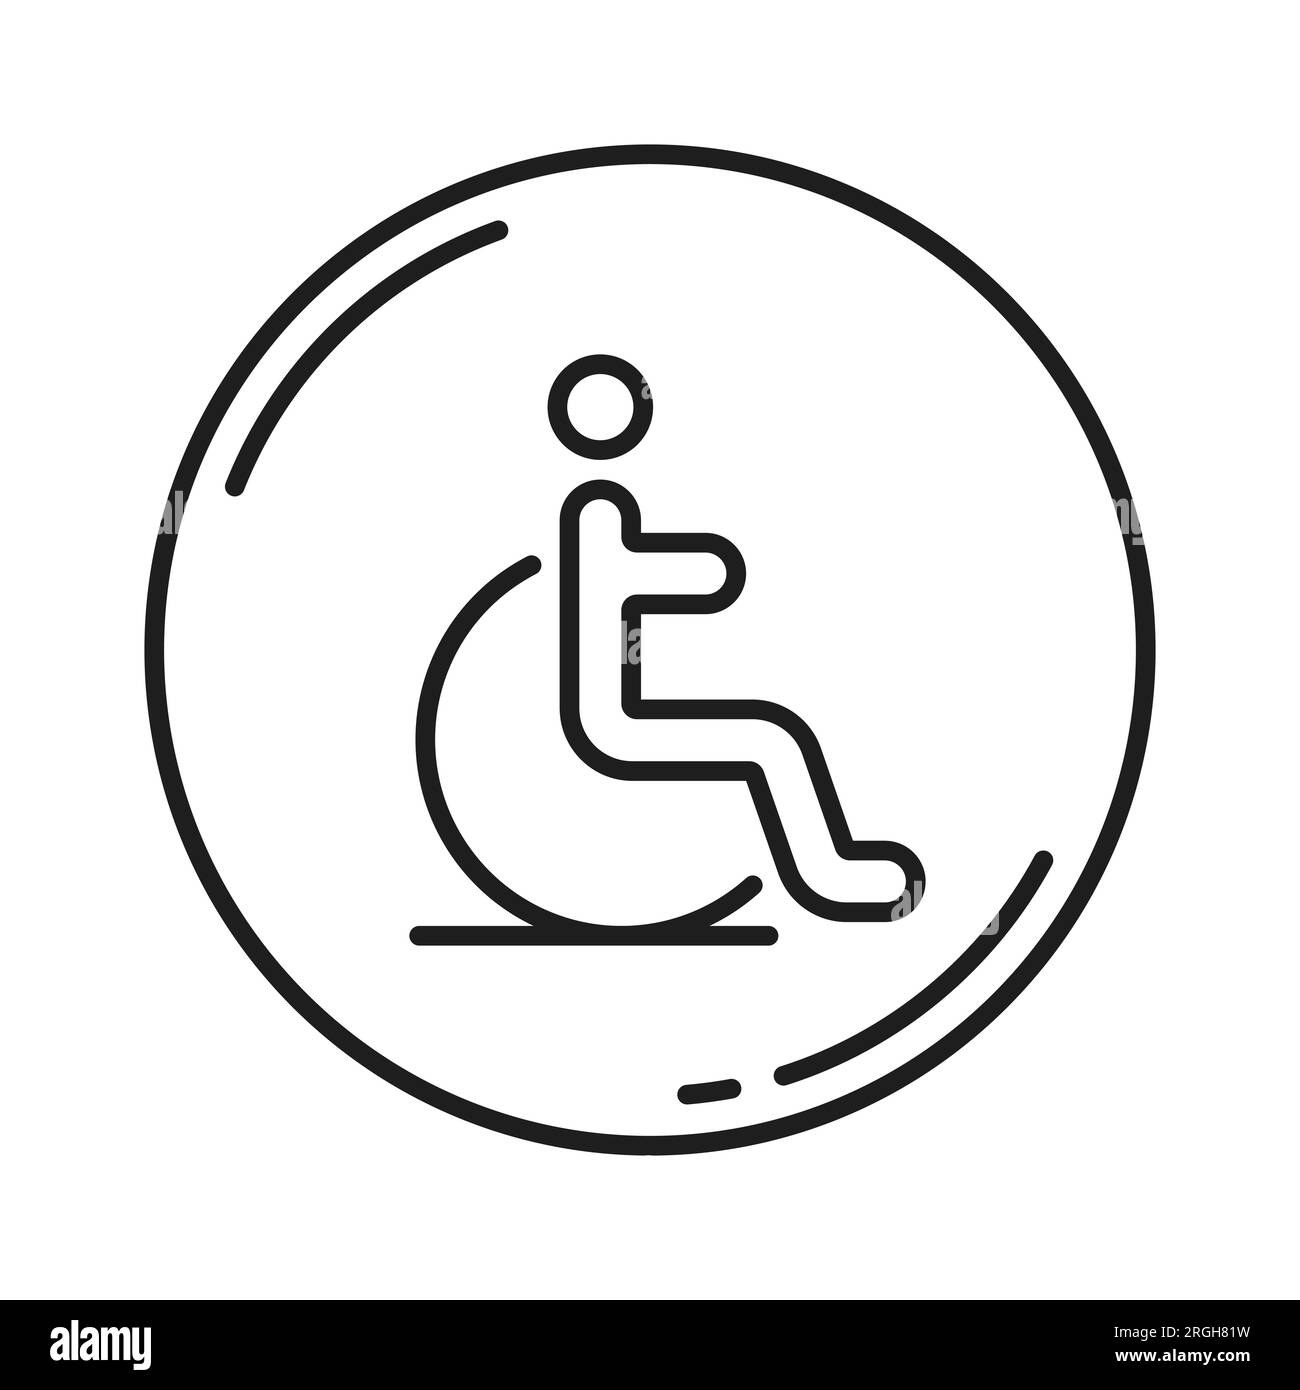 Parking for disabled line icon of car garage service, vector linear sign. Parking slot for disabled, outline pictogram for special need vehicle valet or public garage slot and transport parking zone Stock Vector